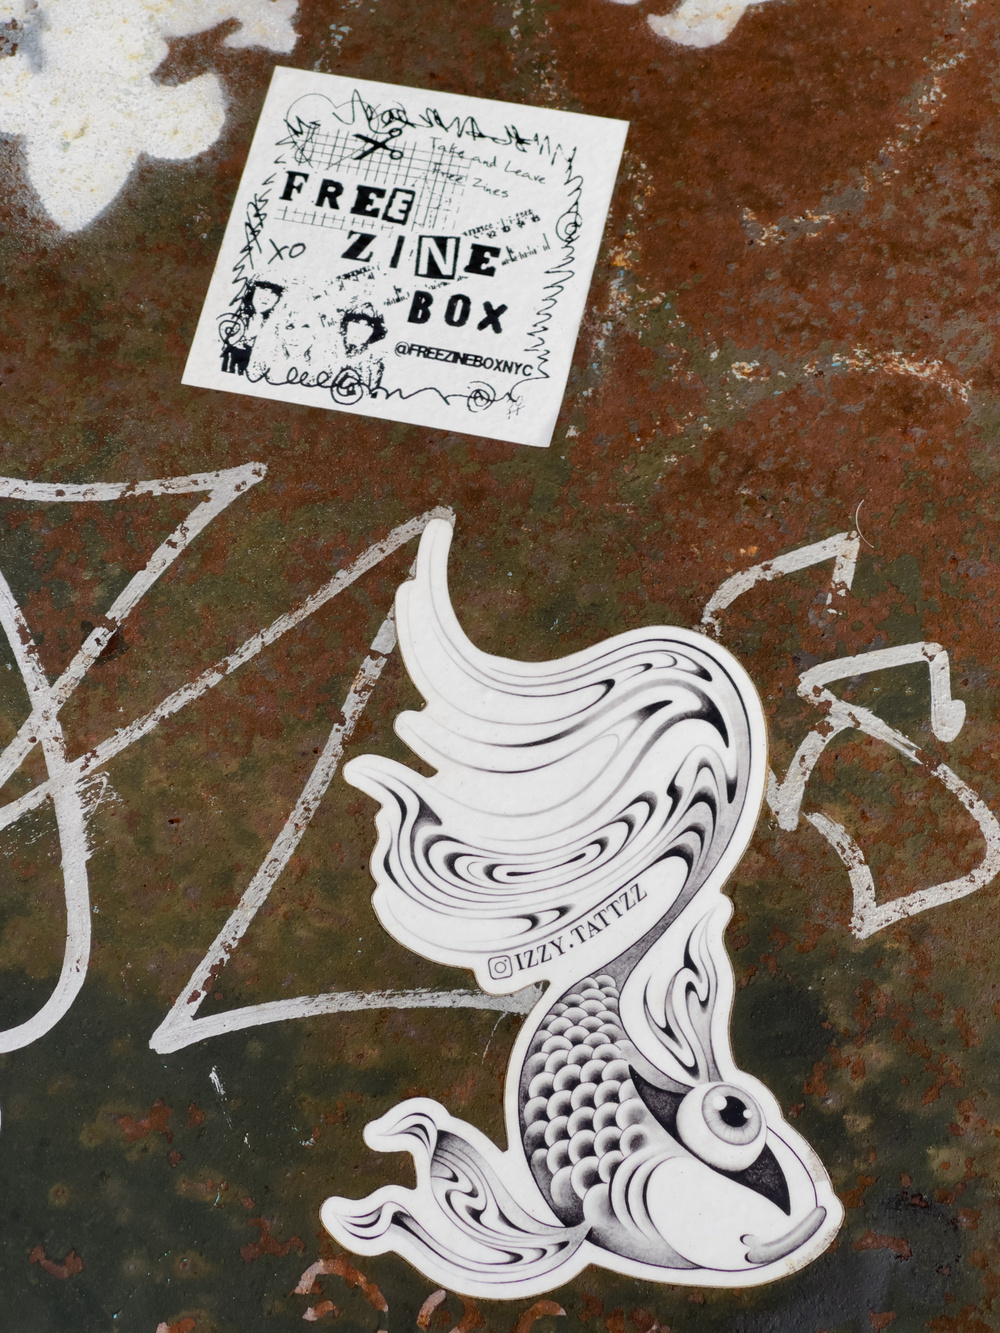 Stickers on a metal surface. The top is for “Free Zine Box.” The bottom is an oriental stylized drawing of a Koi fish.